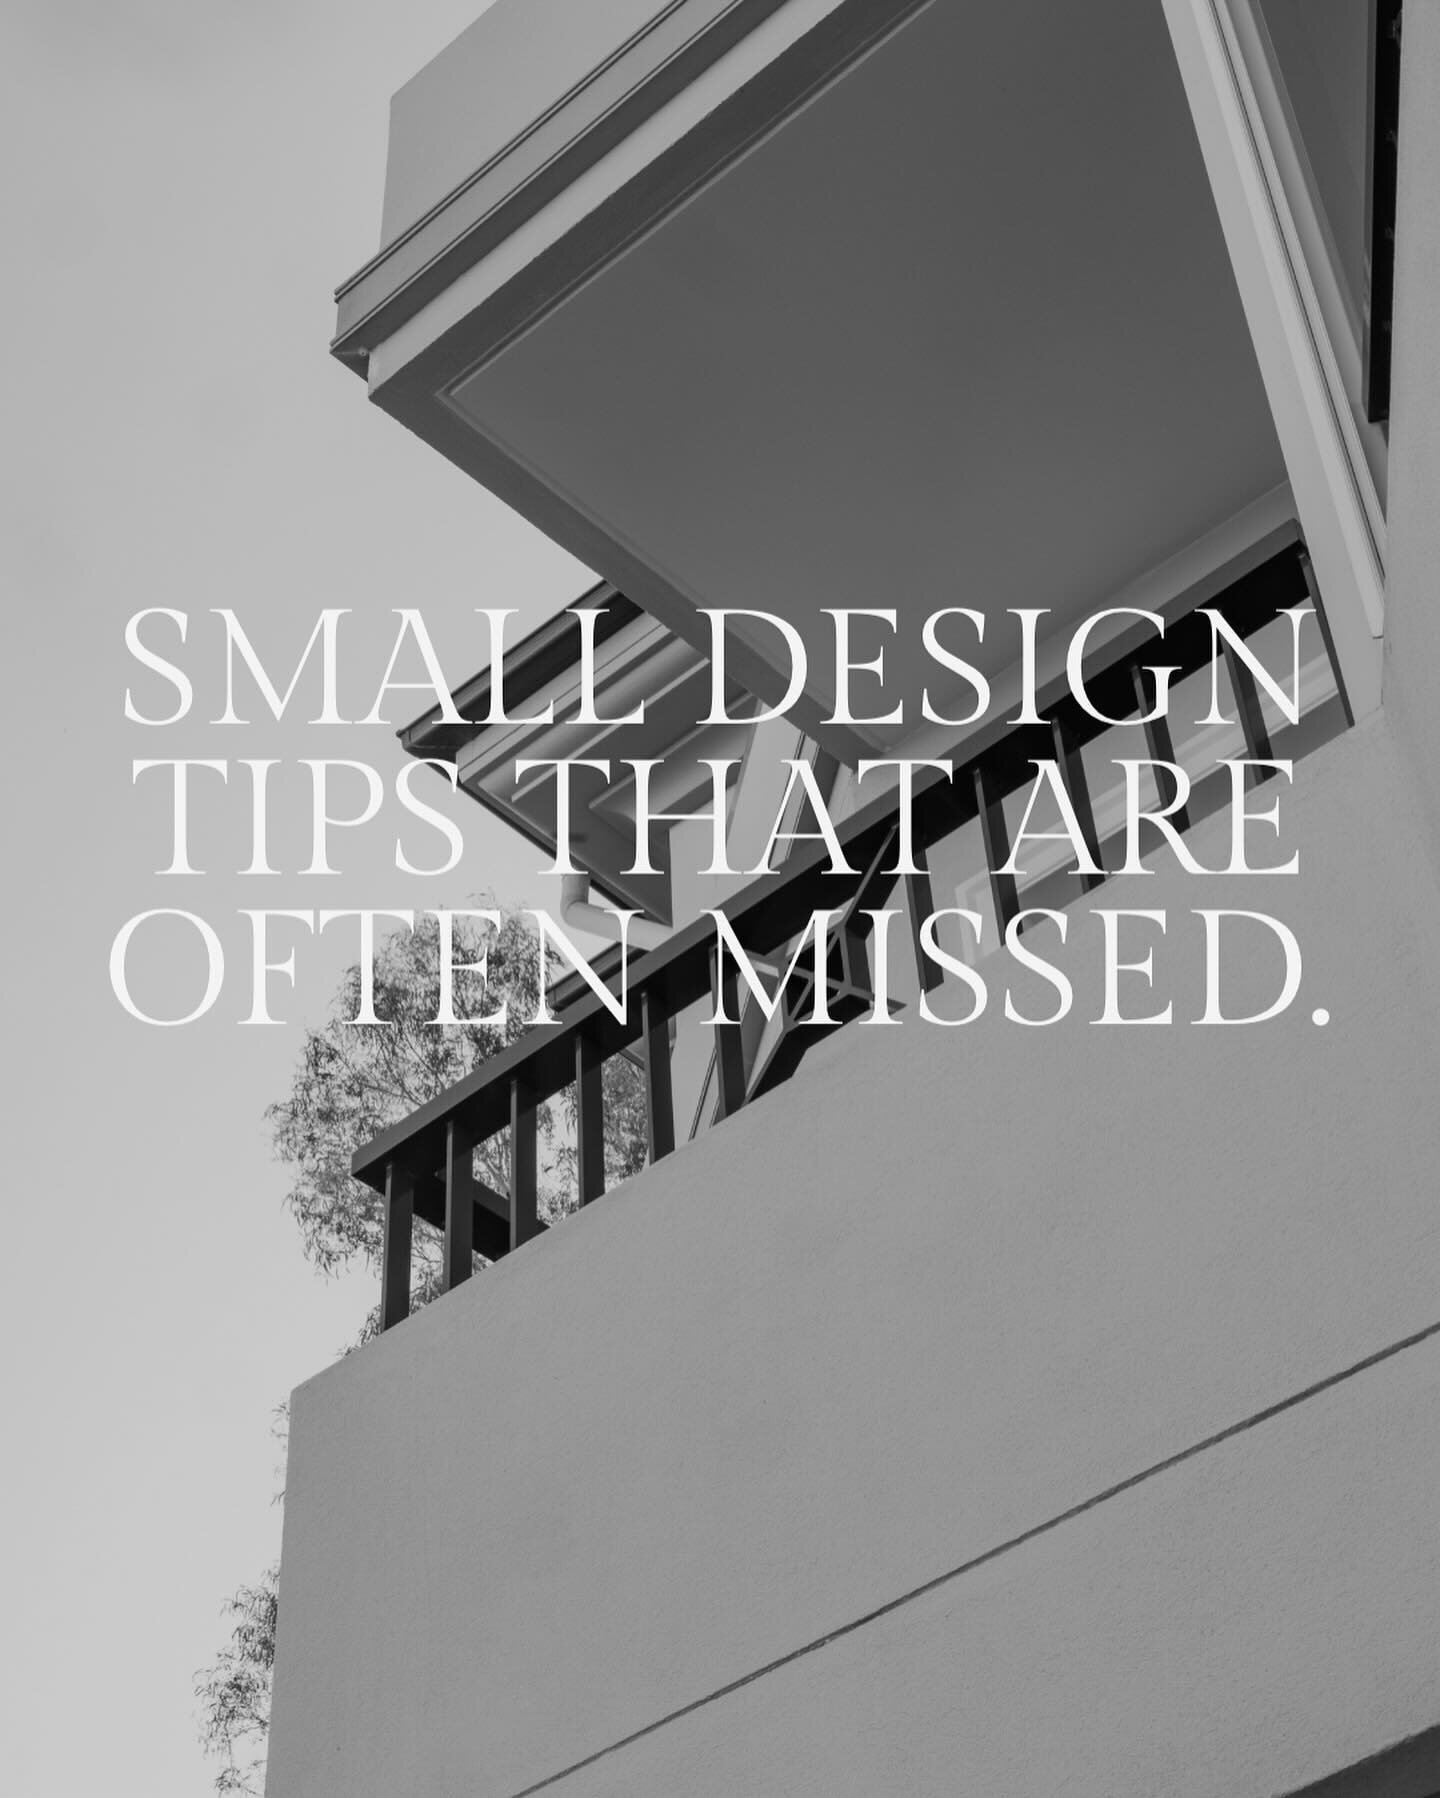 Small design tips that are often missed!